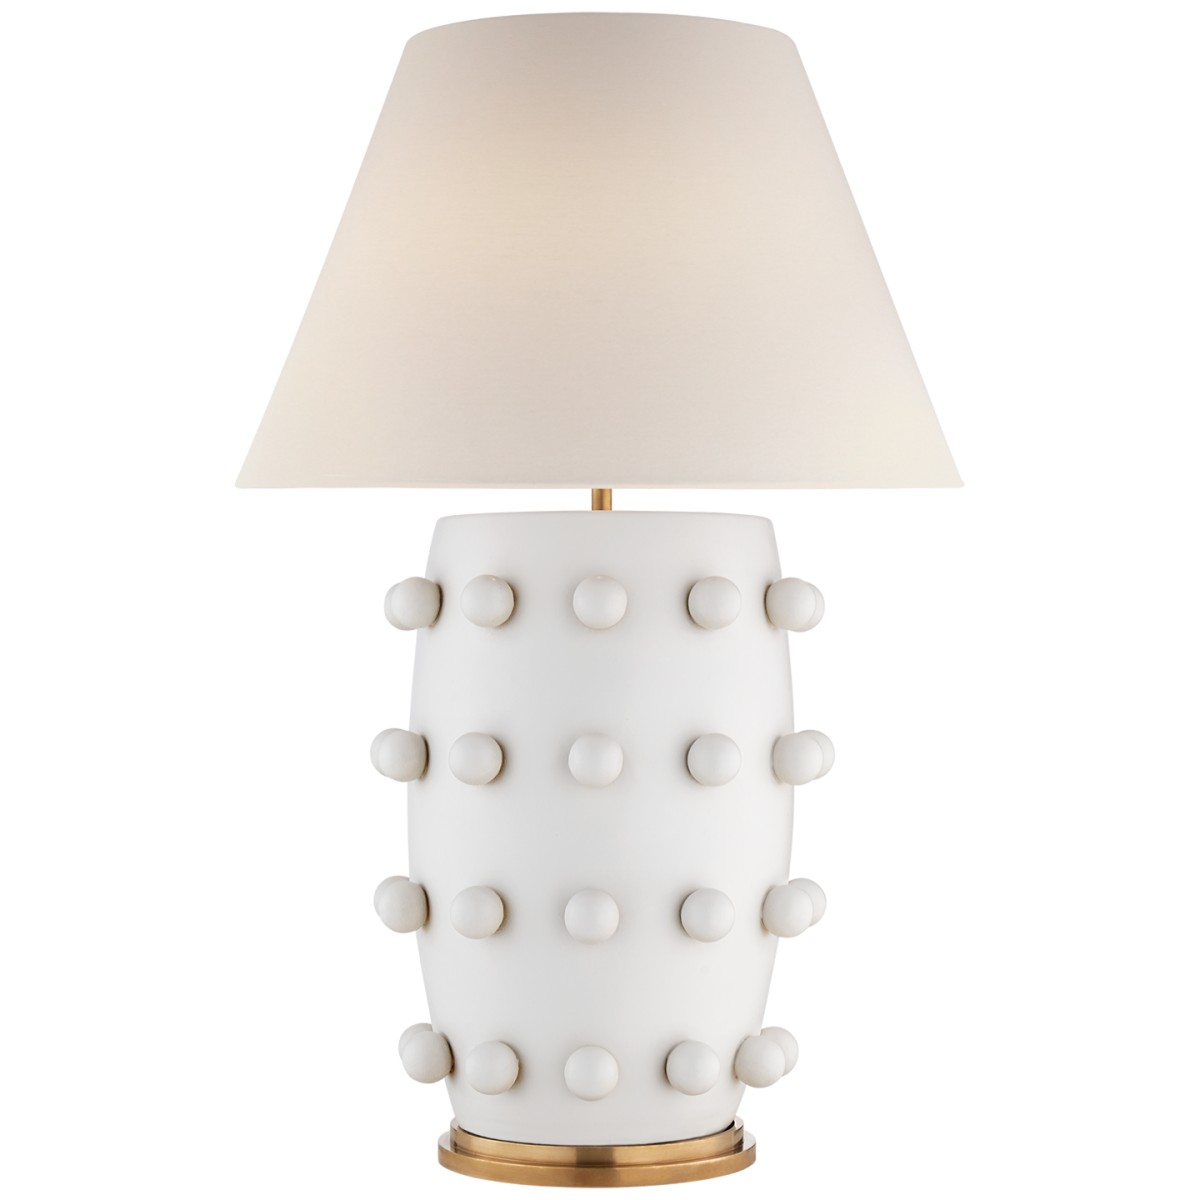 Linden Table Lamp with Linen Shade